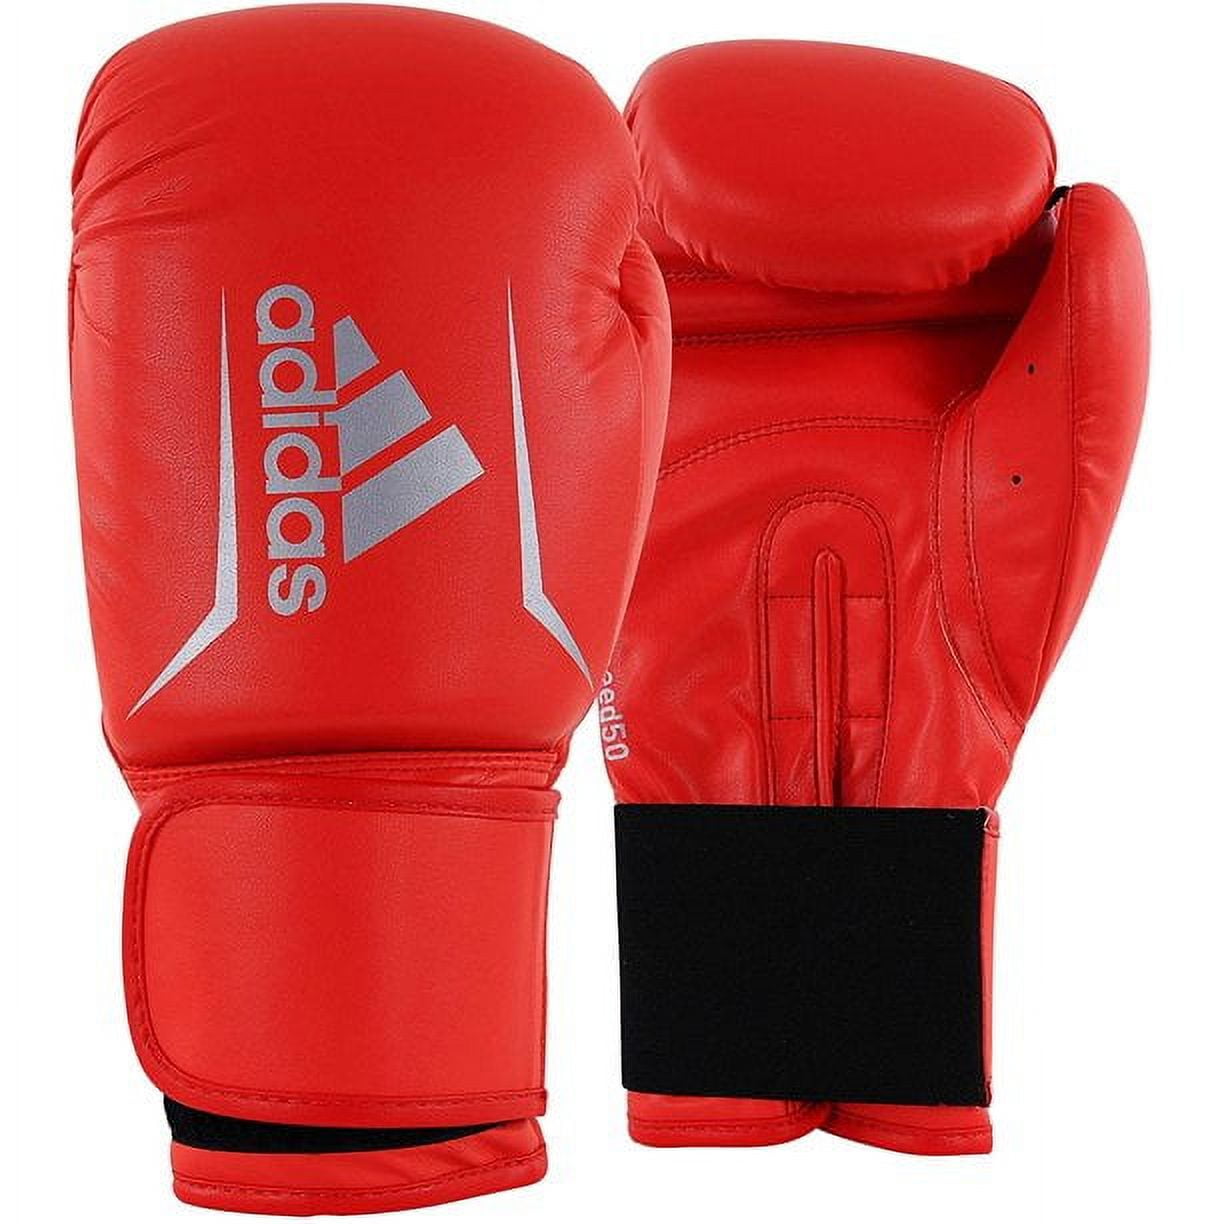 adidas FLX 3.0 Heavy Sparring, for for Men 12oz Gloves Fitness Light Boxing Solar Women Kickboxing & Silver Bags. Training, Red, and and Gym, Speed Punching, 50